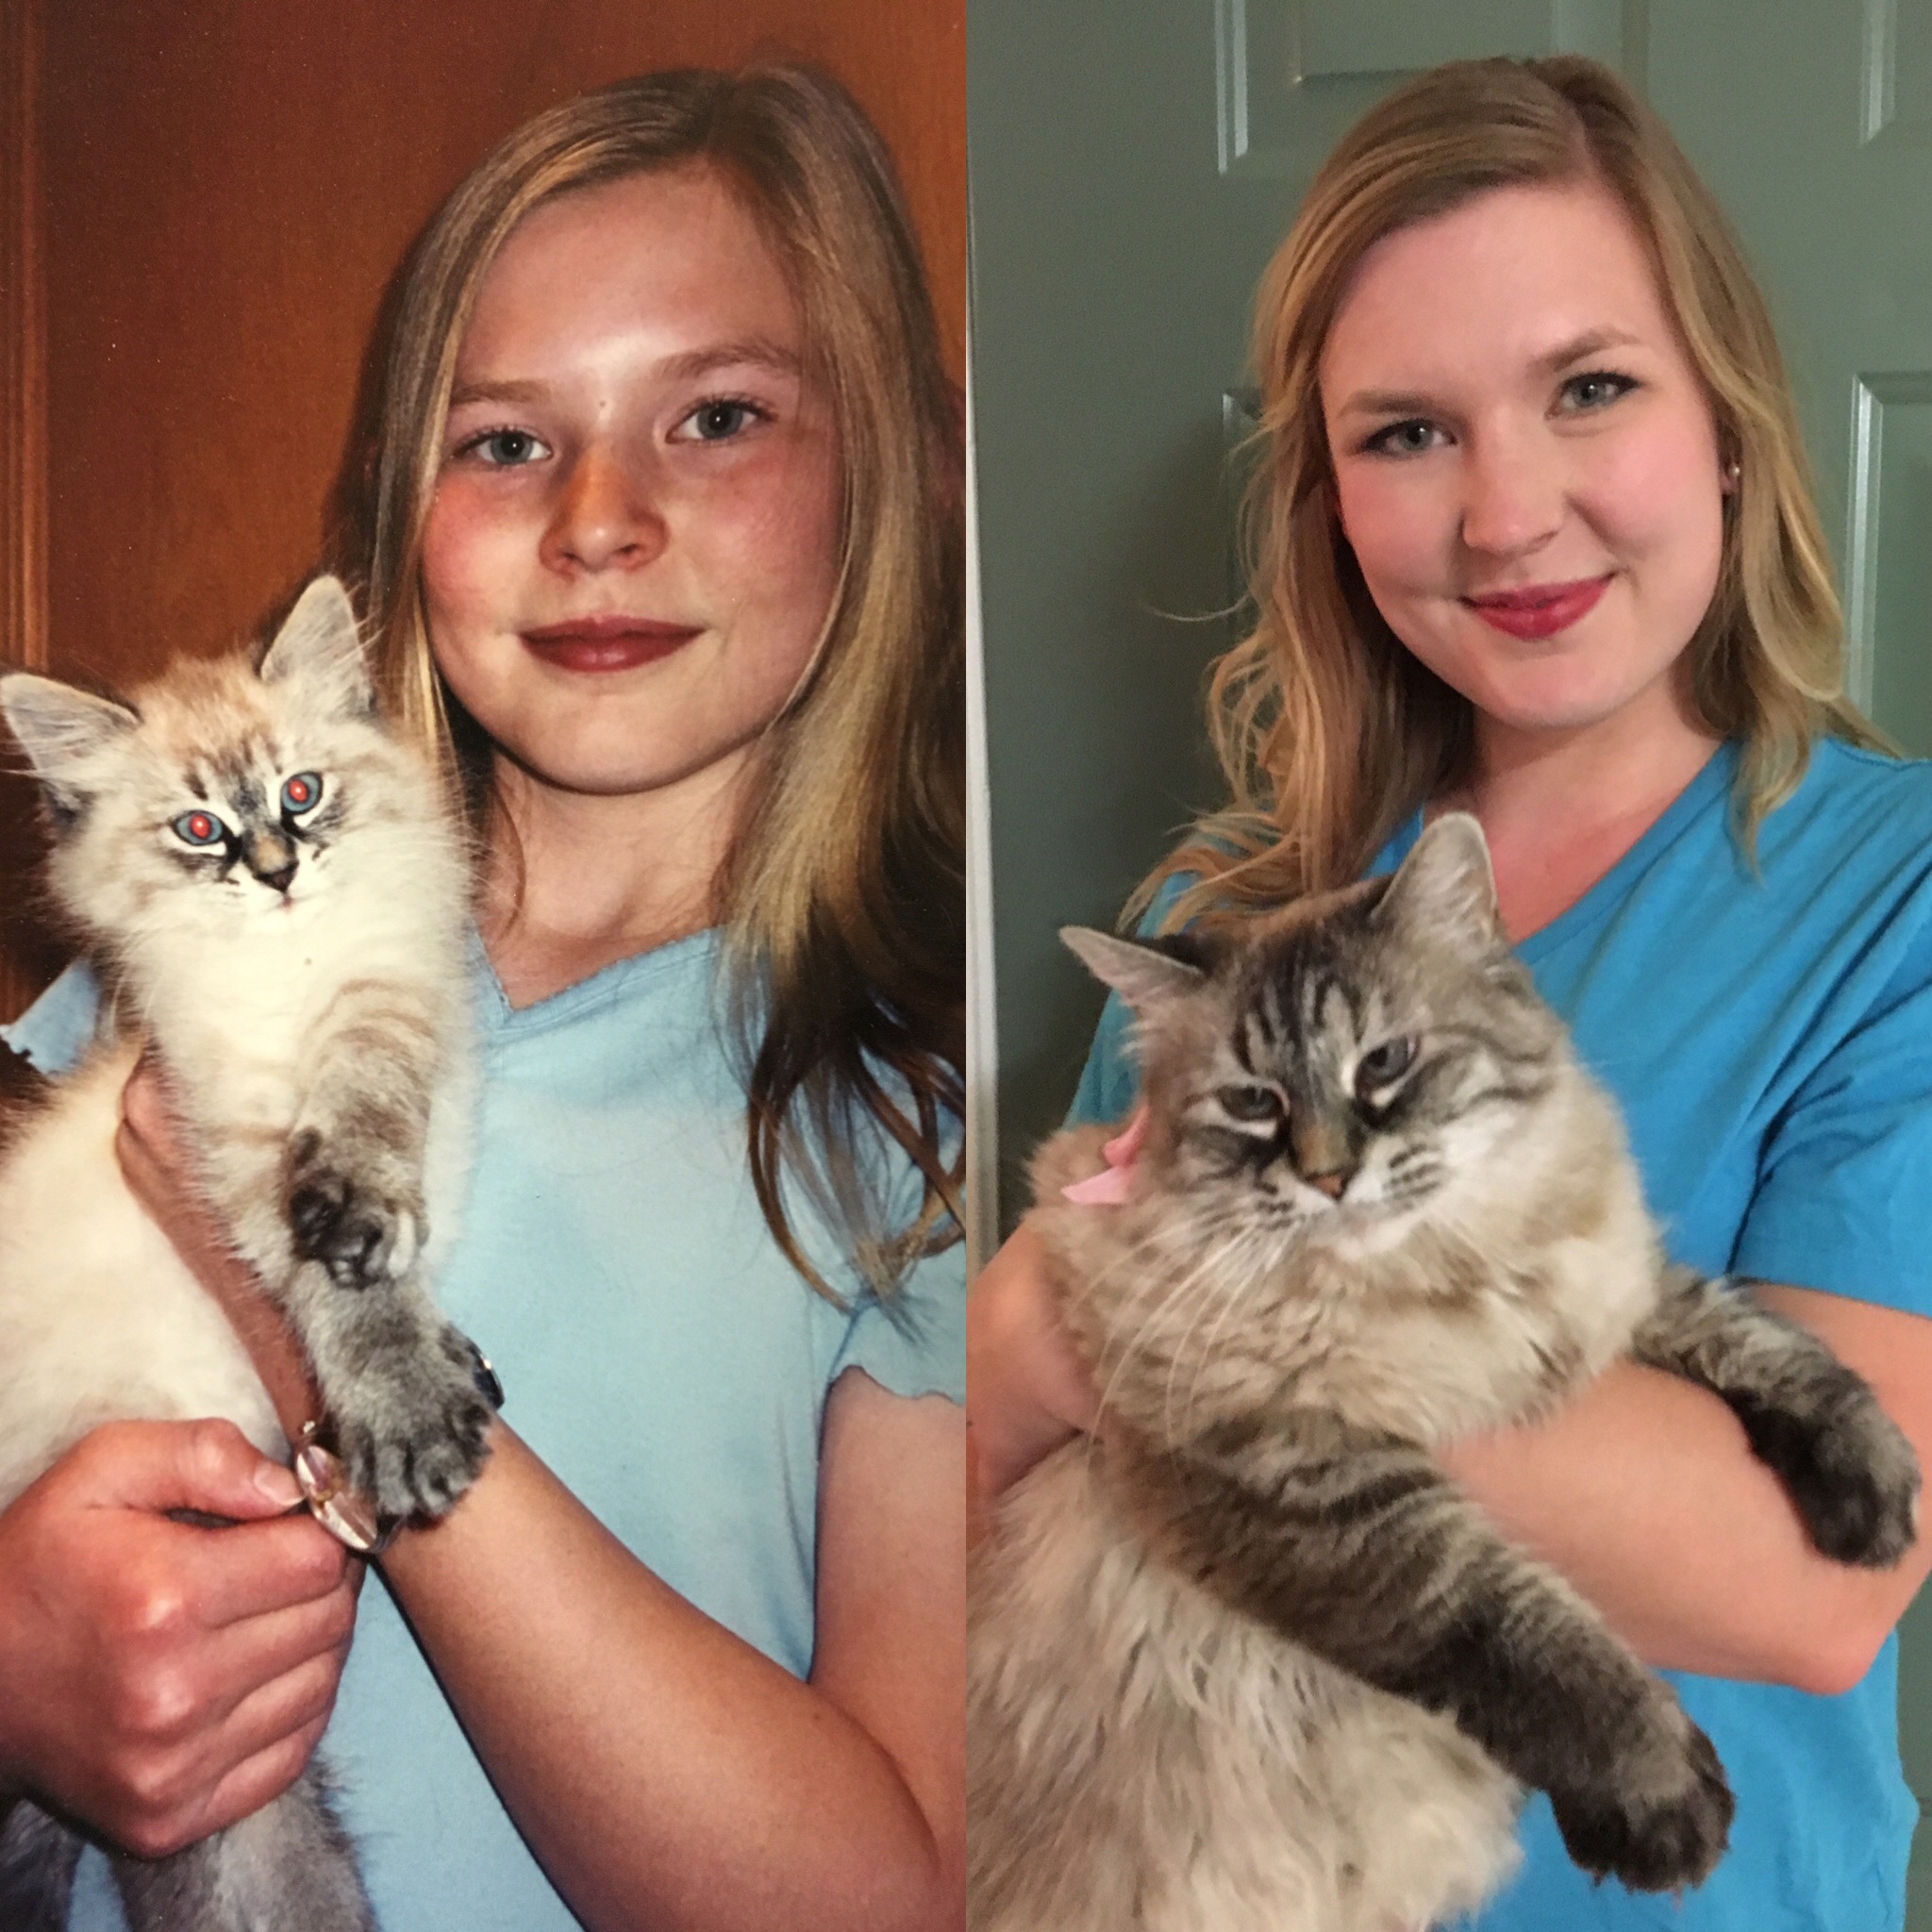 a photo of a little girl smiling as she holds her kitten and a photo of that same girl years later, now an adult, recreating that photo with the same cat